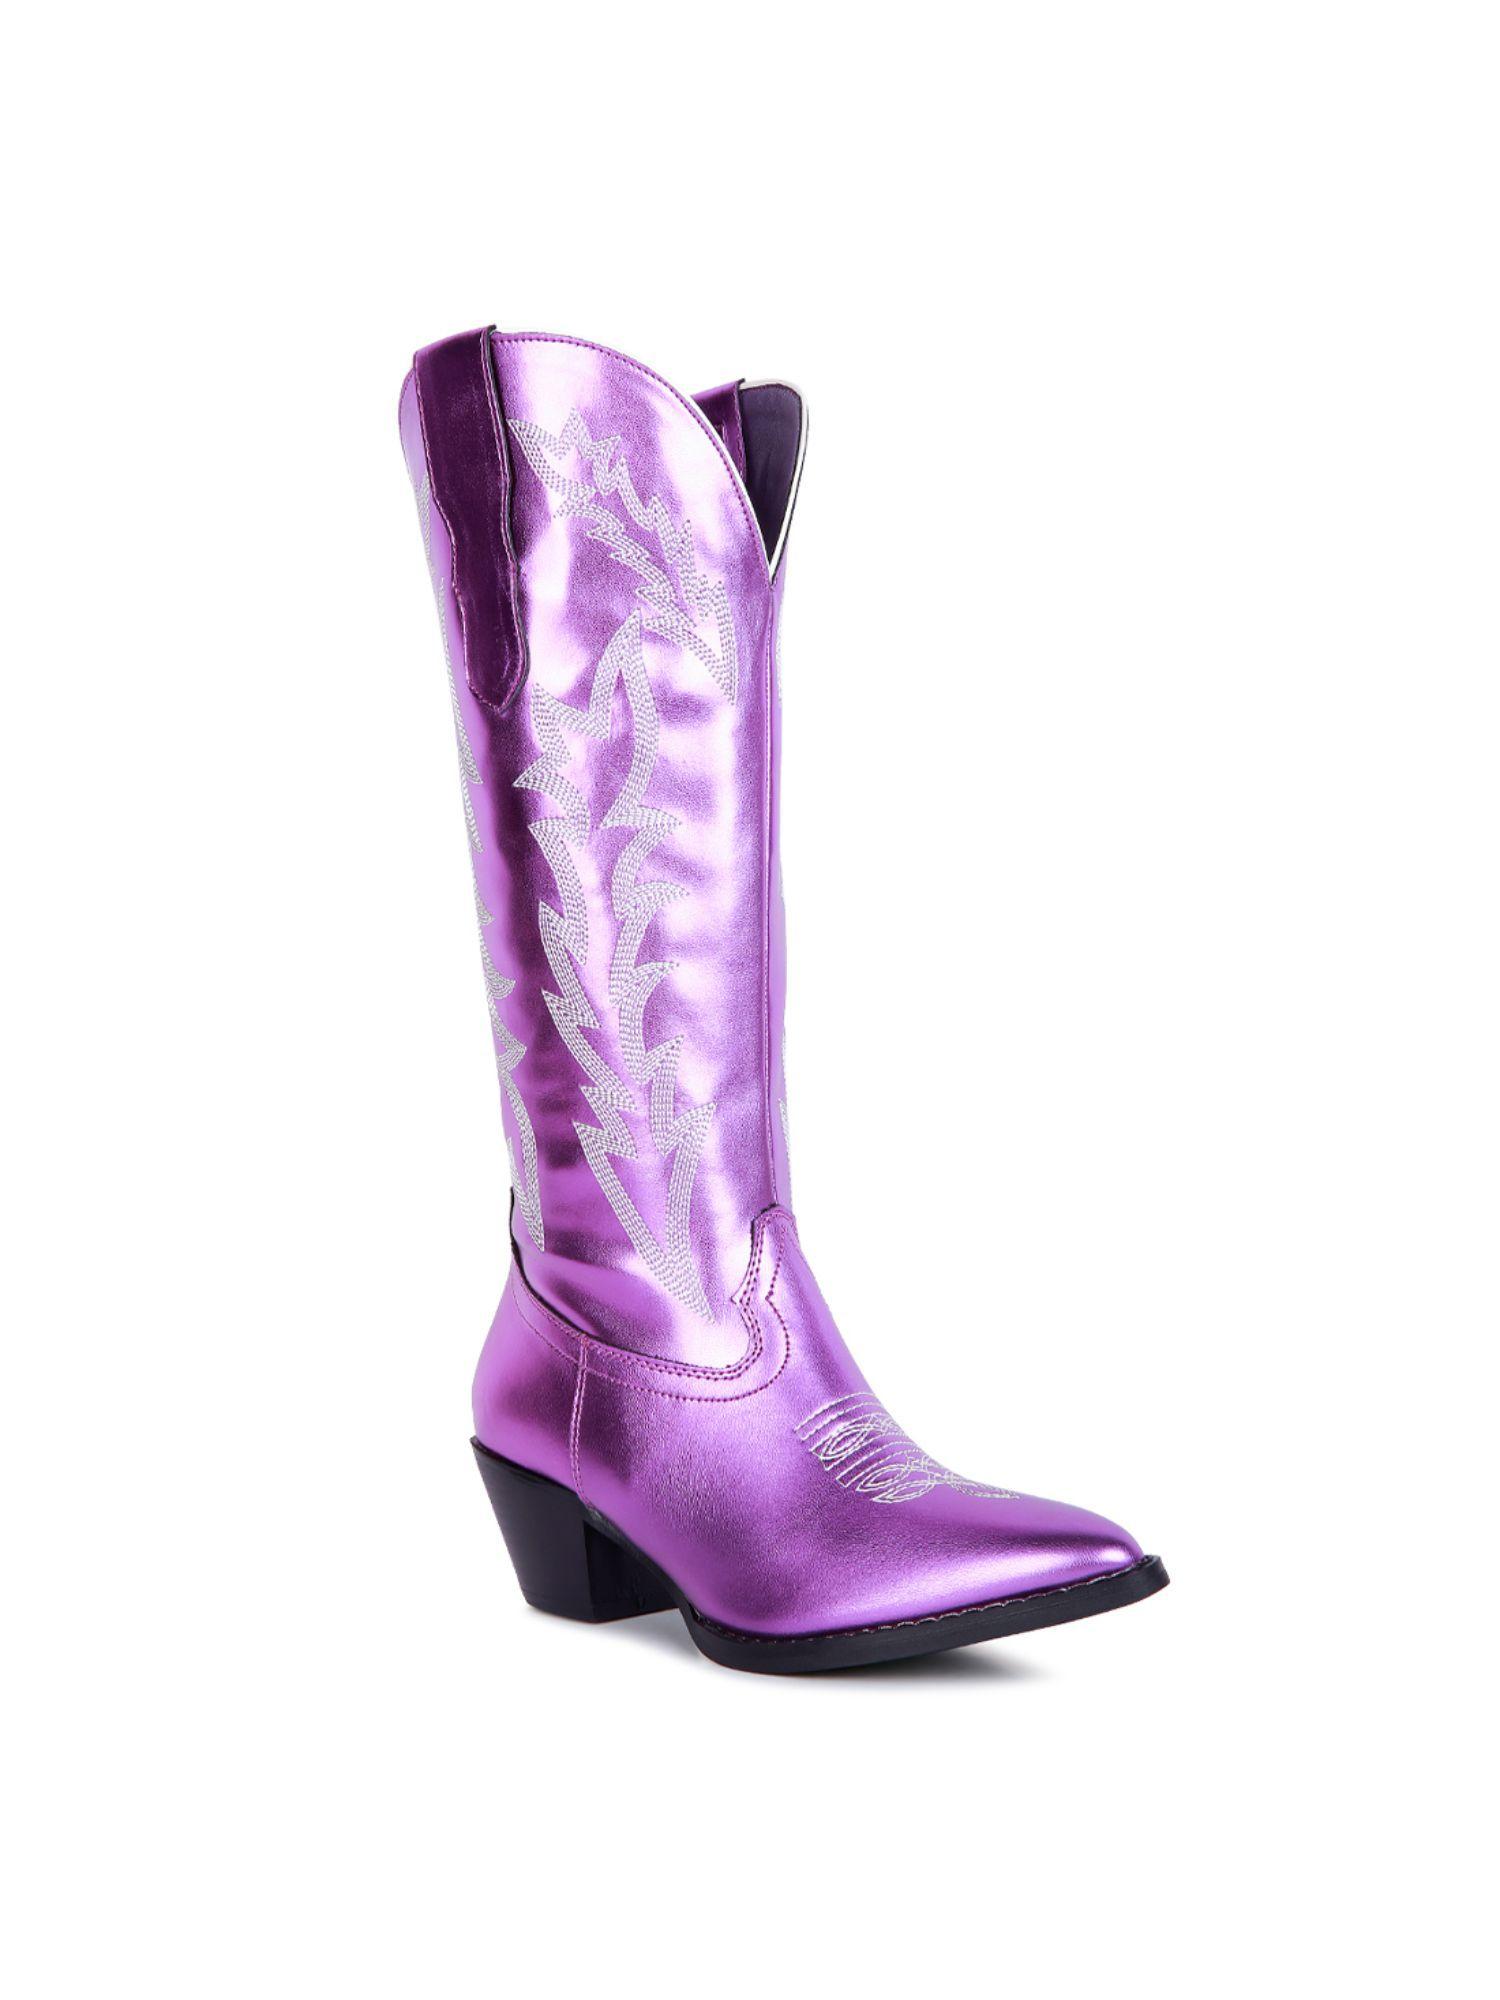 patterned purple boots